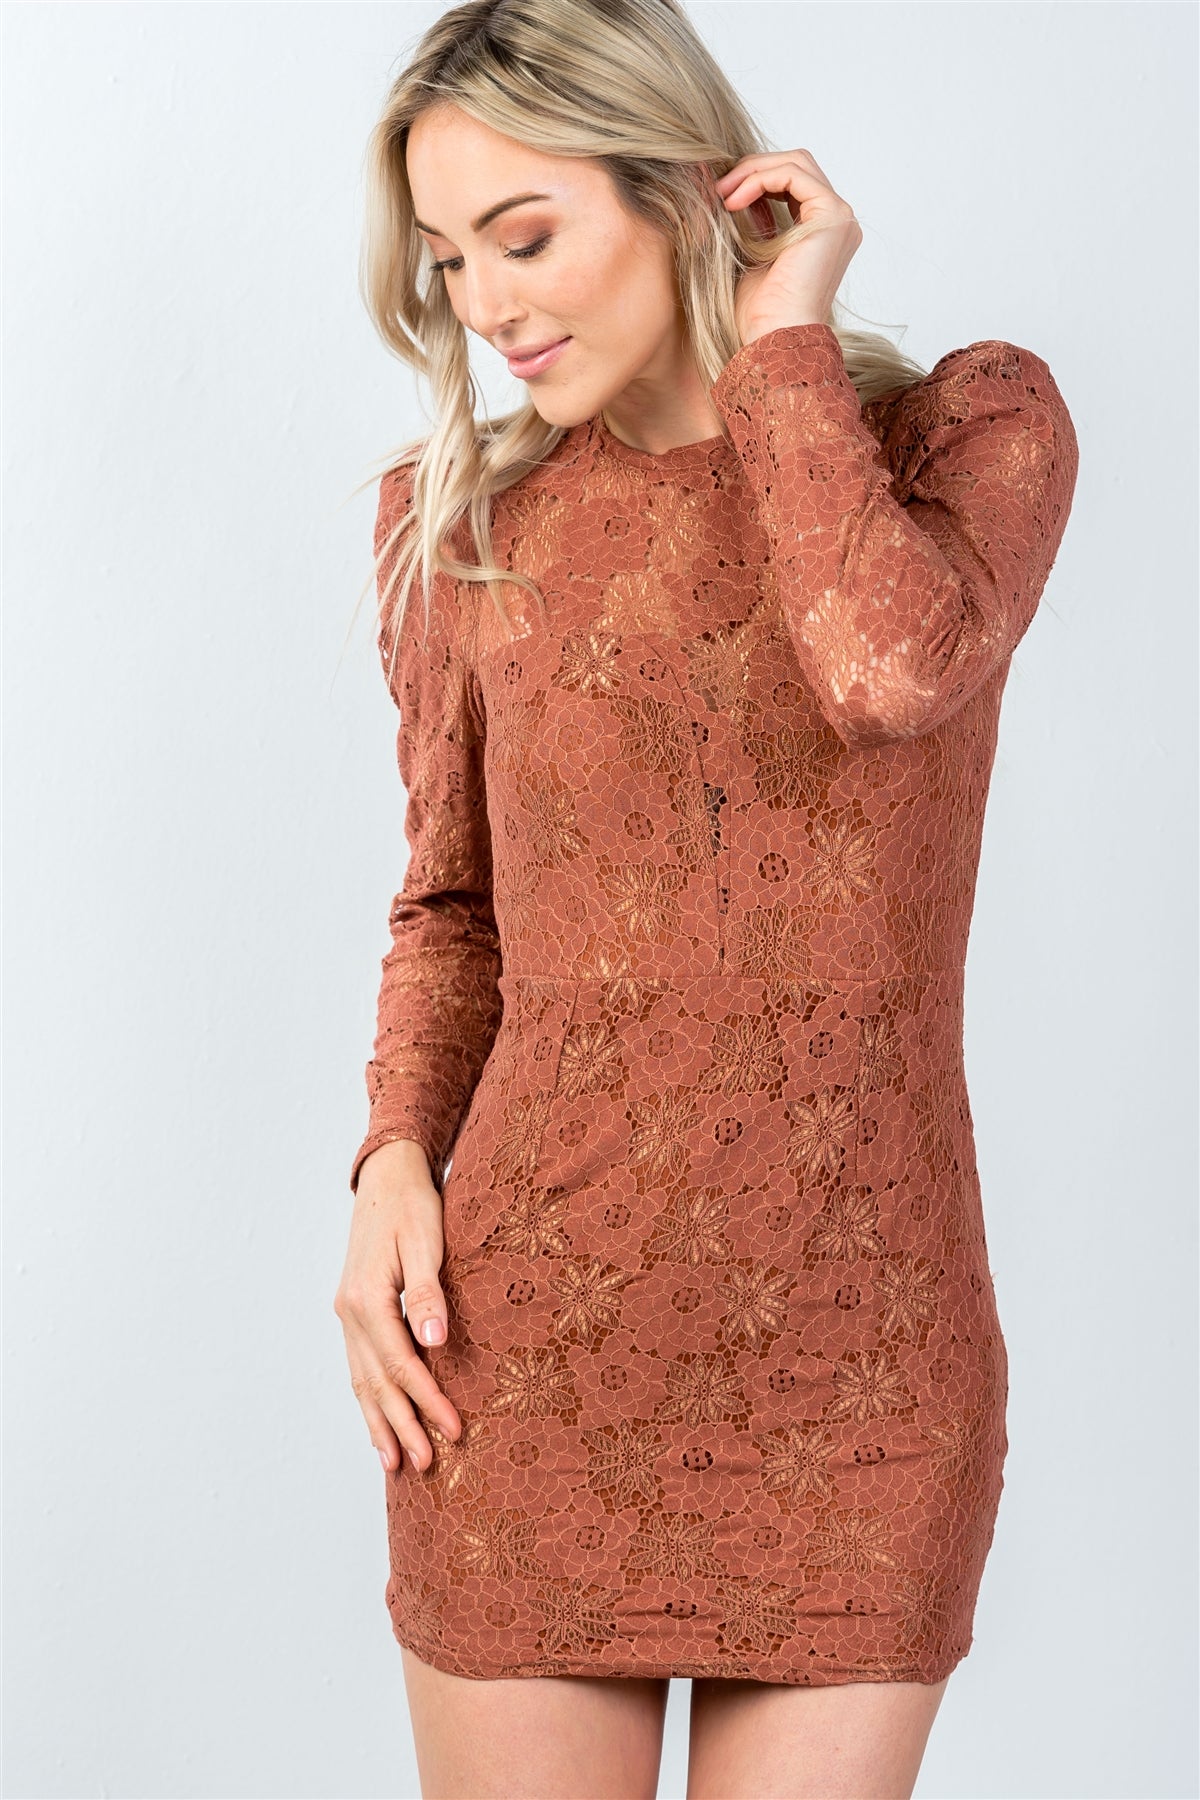 Ladies fashion toffee all floral lace gathered shoulder mini dress